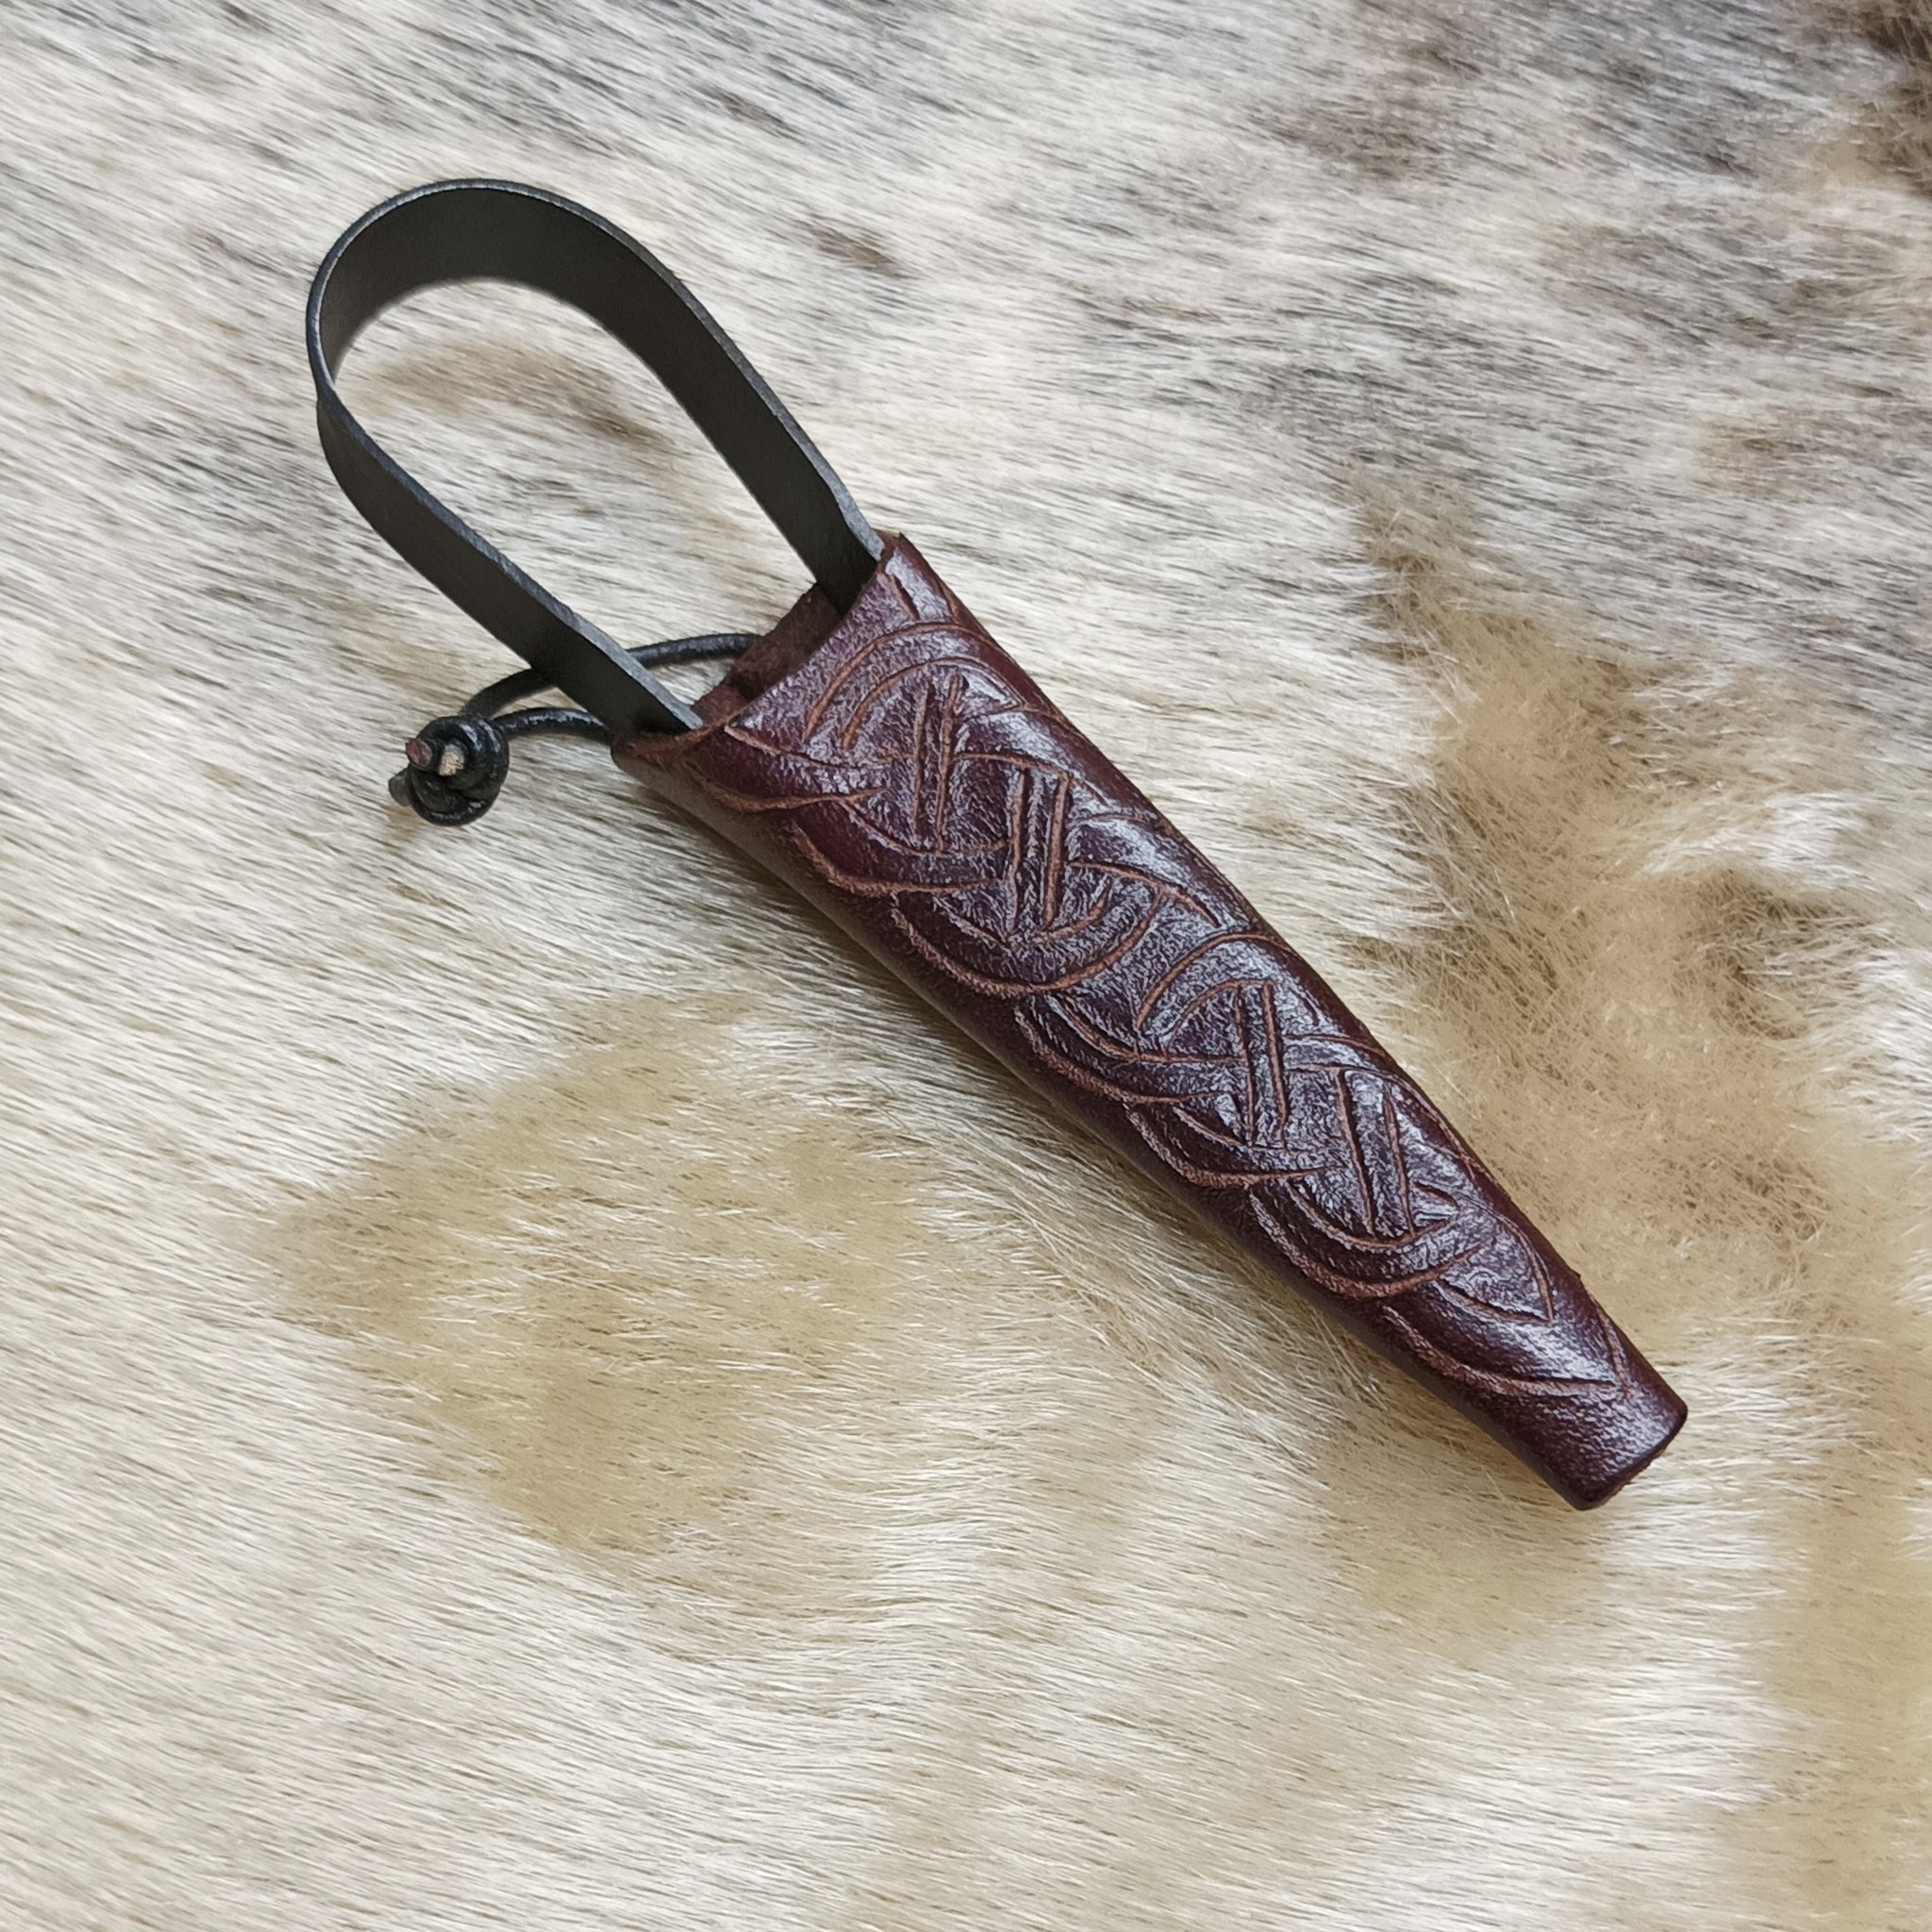 Hand-Forged Small Snips in Handmade Leather Knotwork Sheath